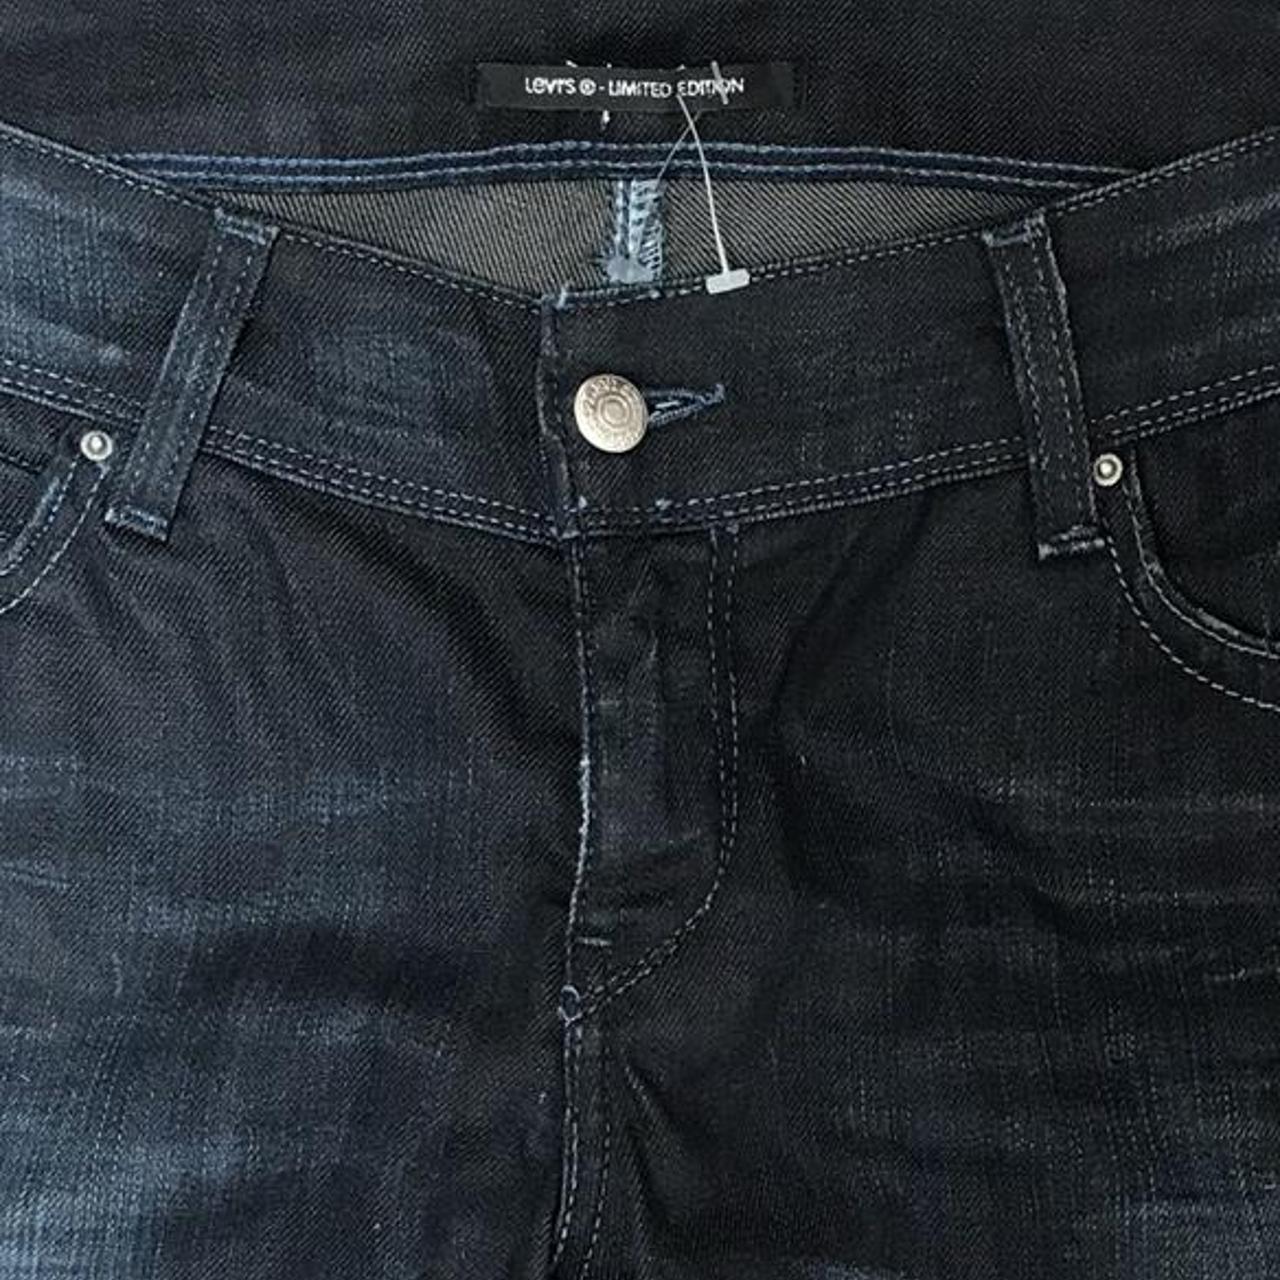 Levis Limited Edition Low waisted blue straight leg... - Depop